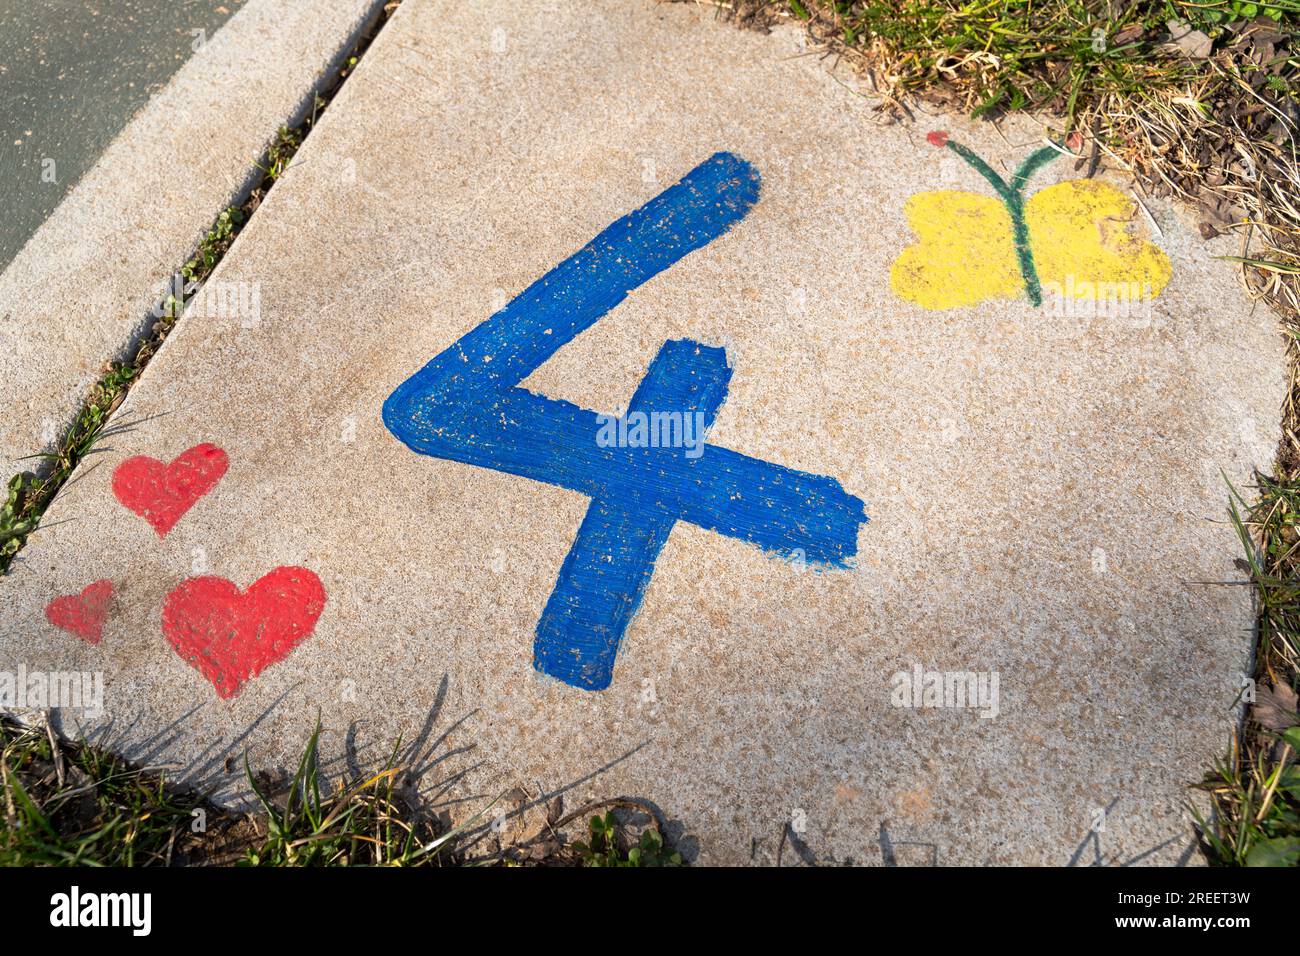 Curb painted by children with a blue number 4, red hearts and a yellow butterfly Stock Photo